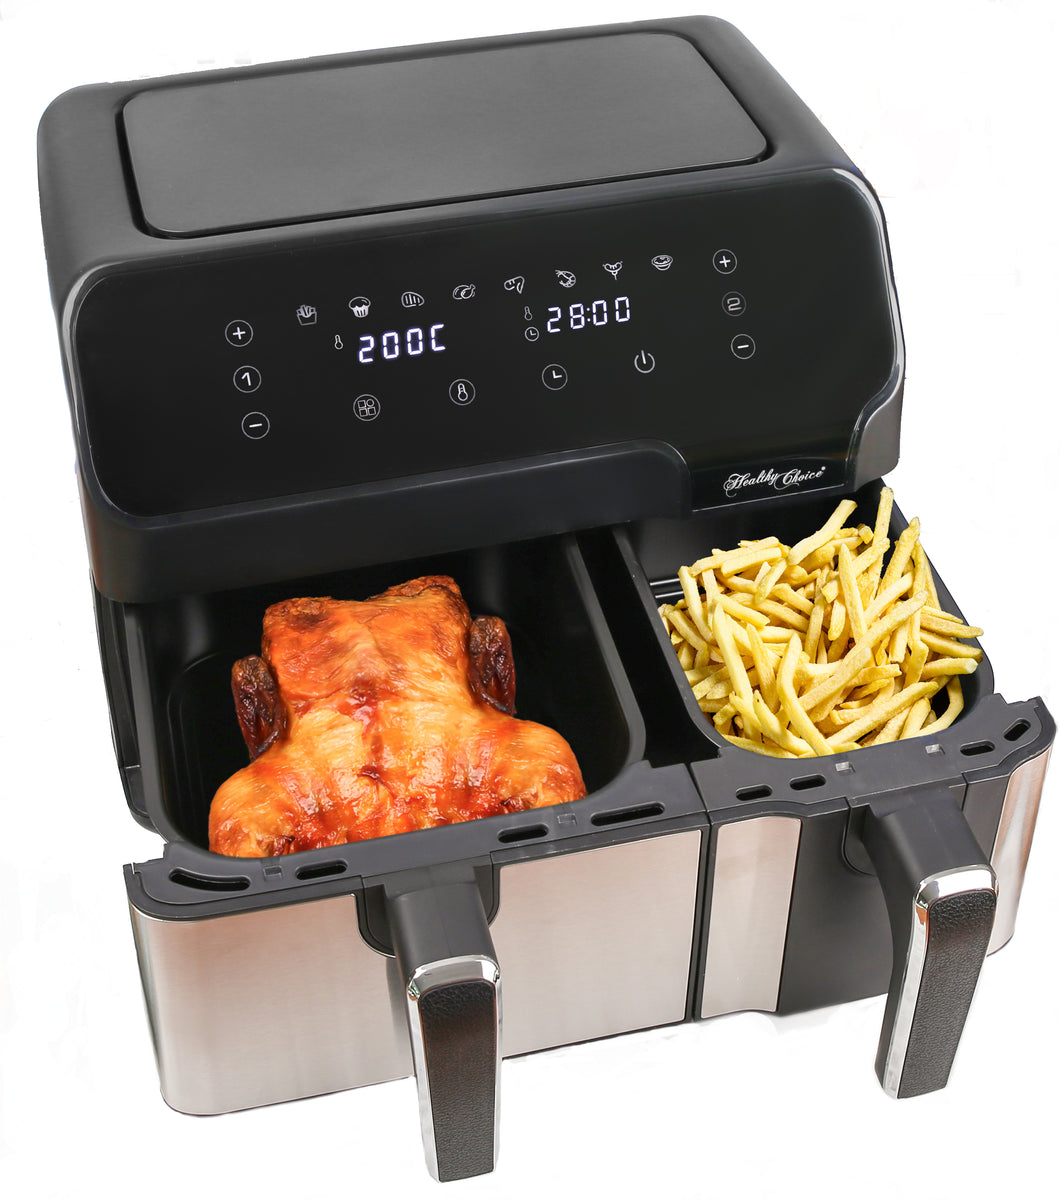 AFDZ100 Dual Zone air fryer with a whole chicken in one cooking basket and a lot of hot chips in the other one.